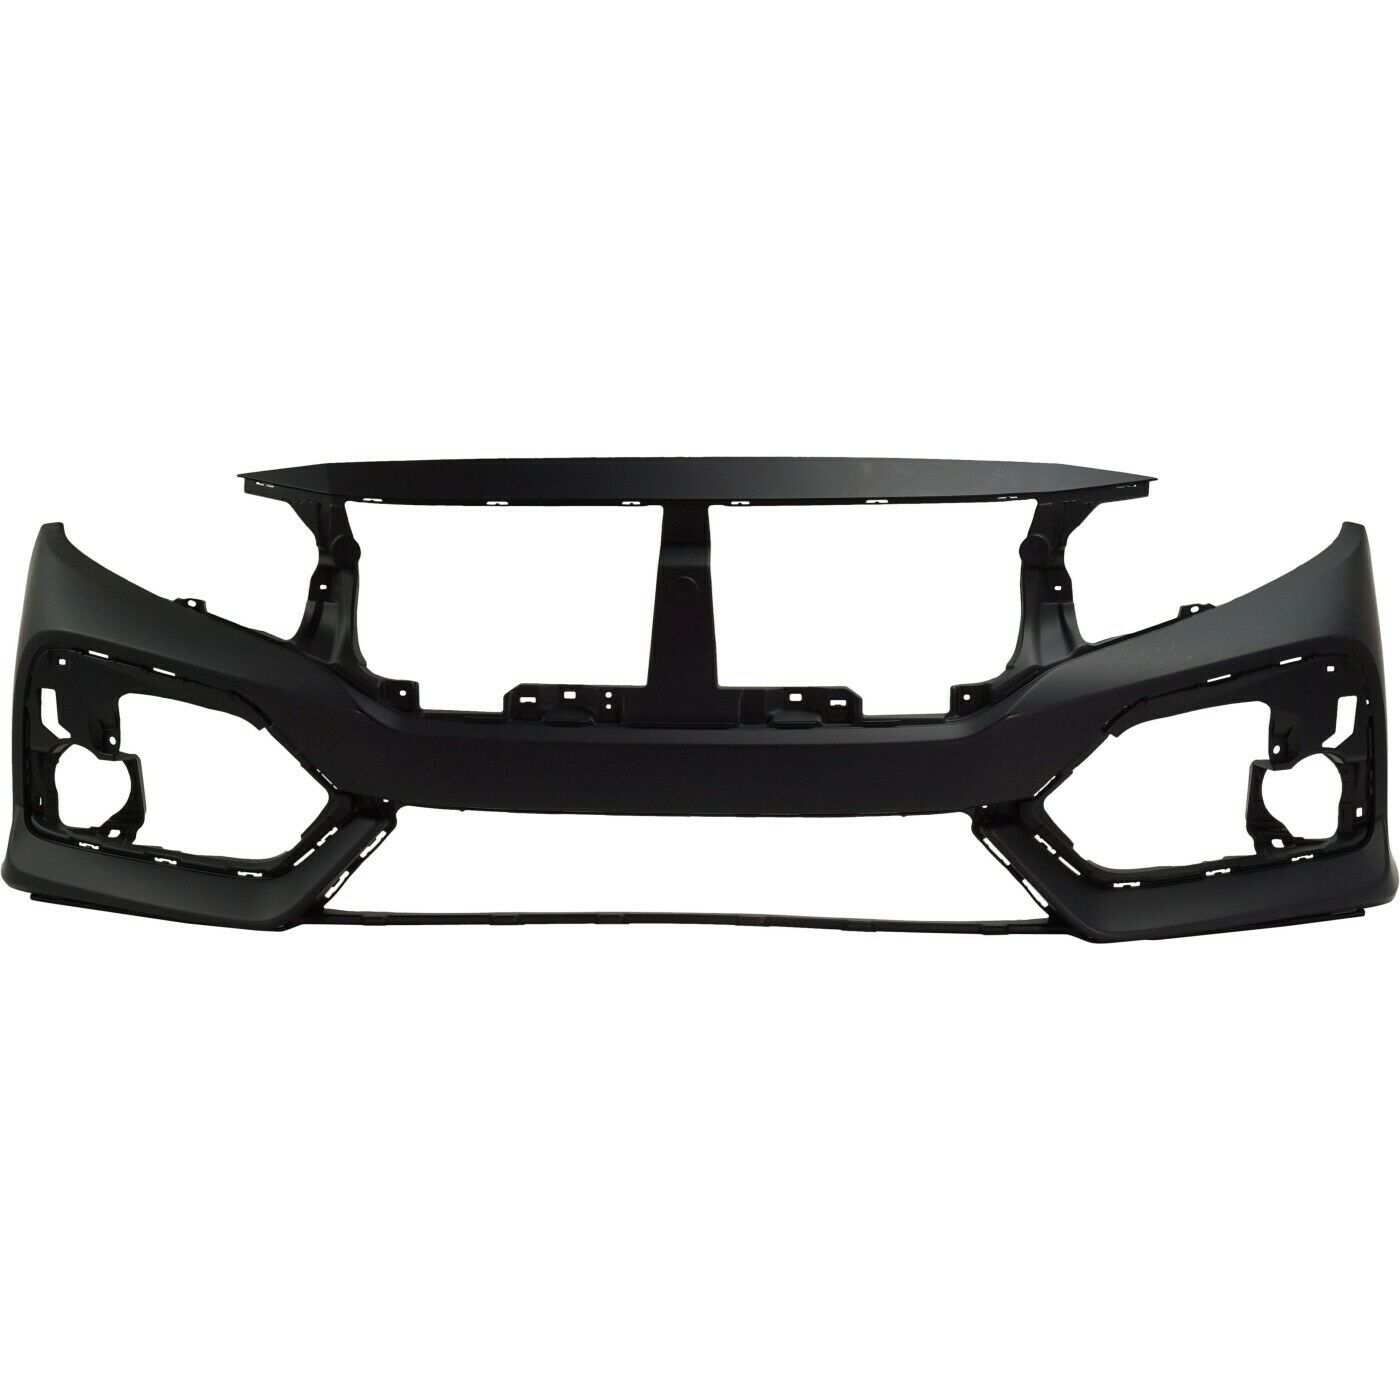 2017 to 2020 Pre Painted Honda Civic Front Bumper - Hatchback